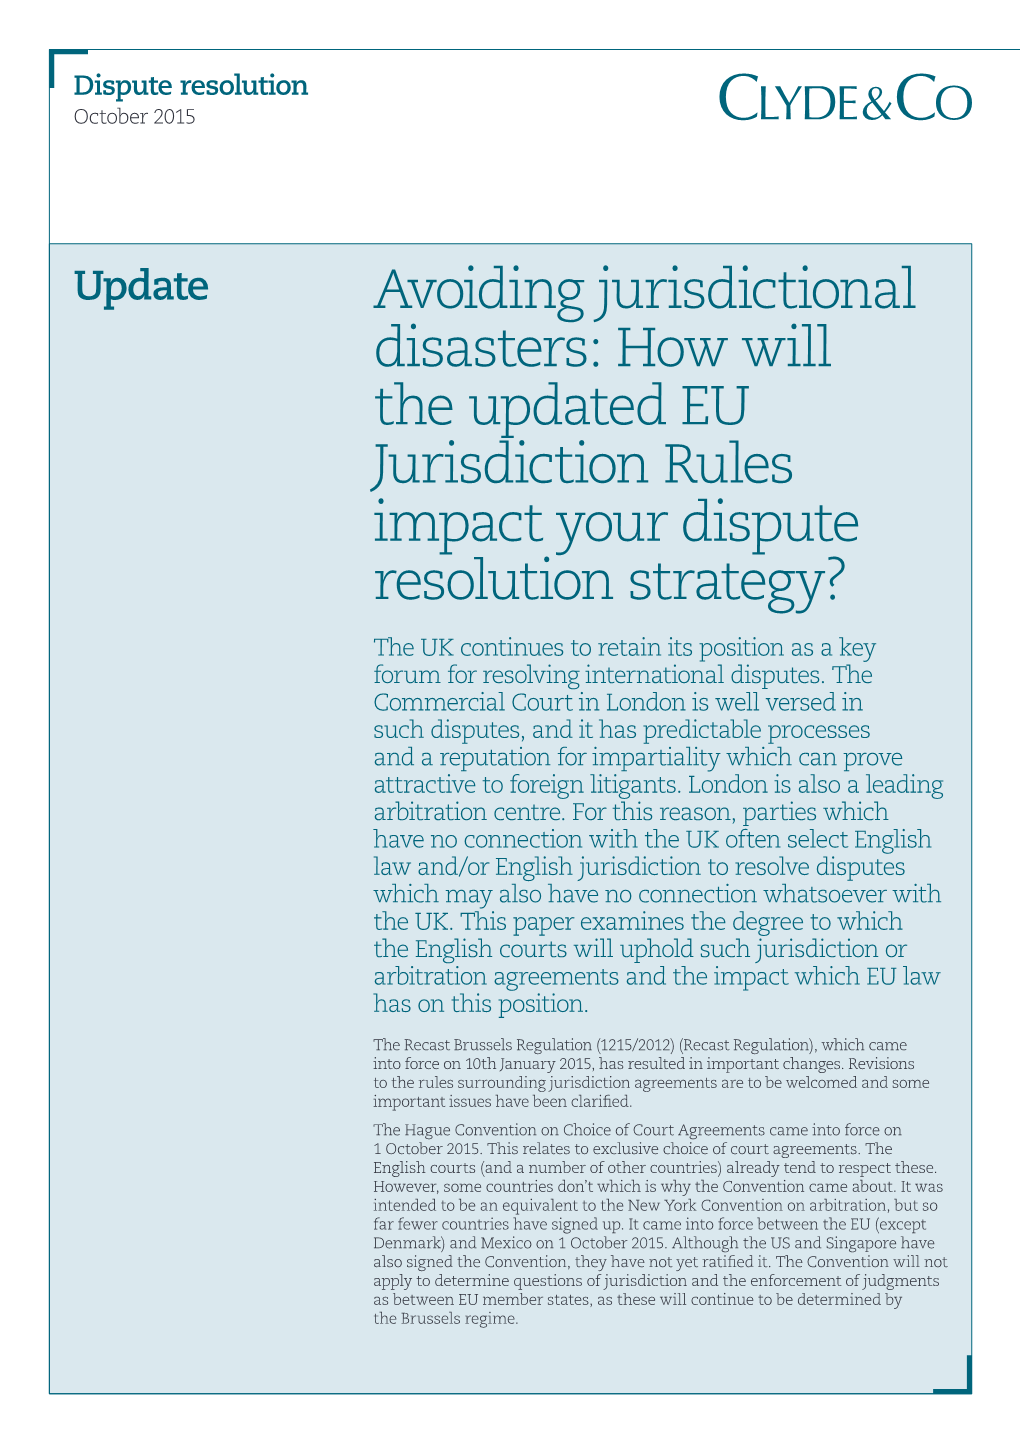 How Will the Updated EU Jurisdiction Rules Impact Your Dispute Resolution Strategy?